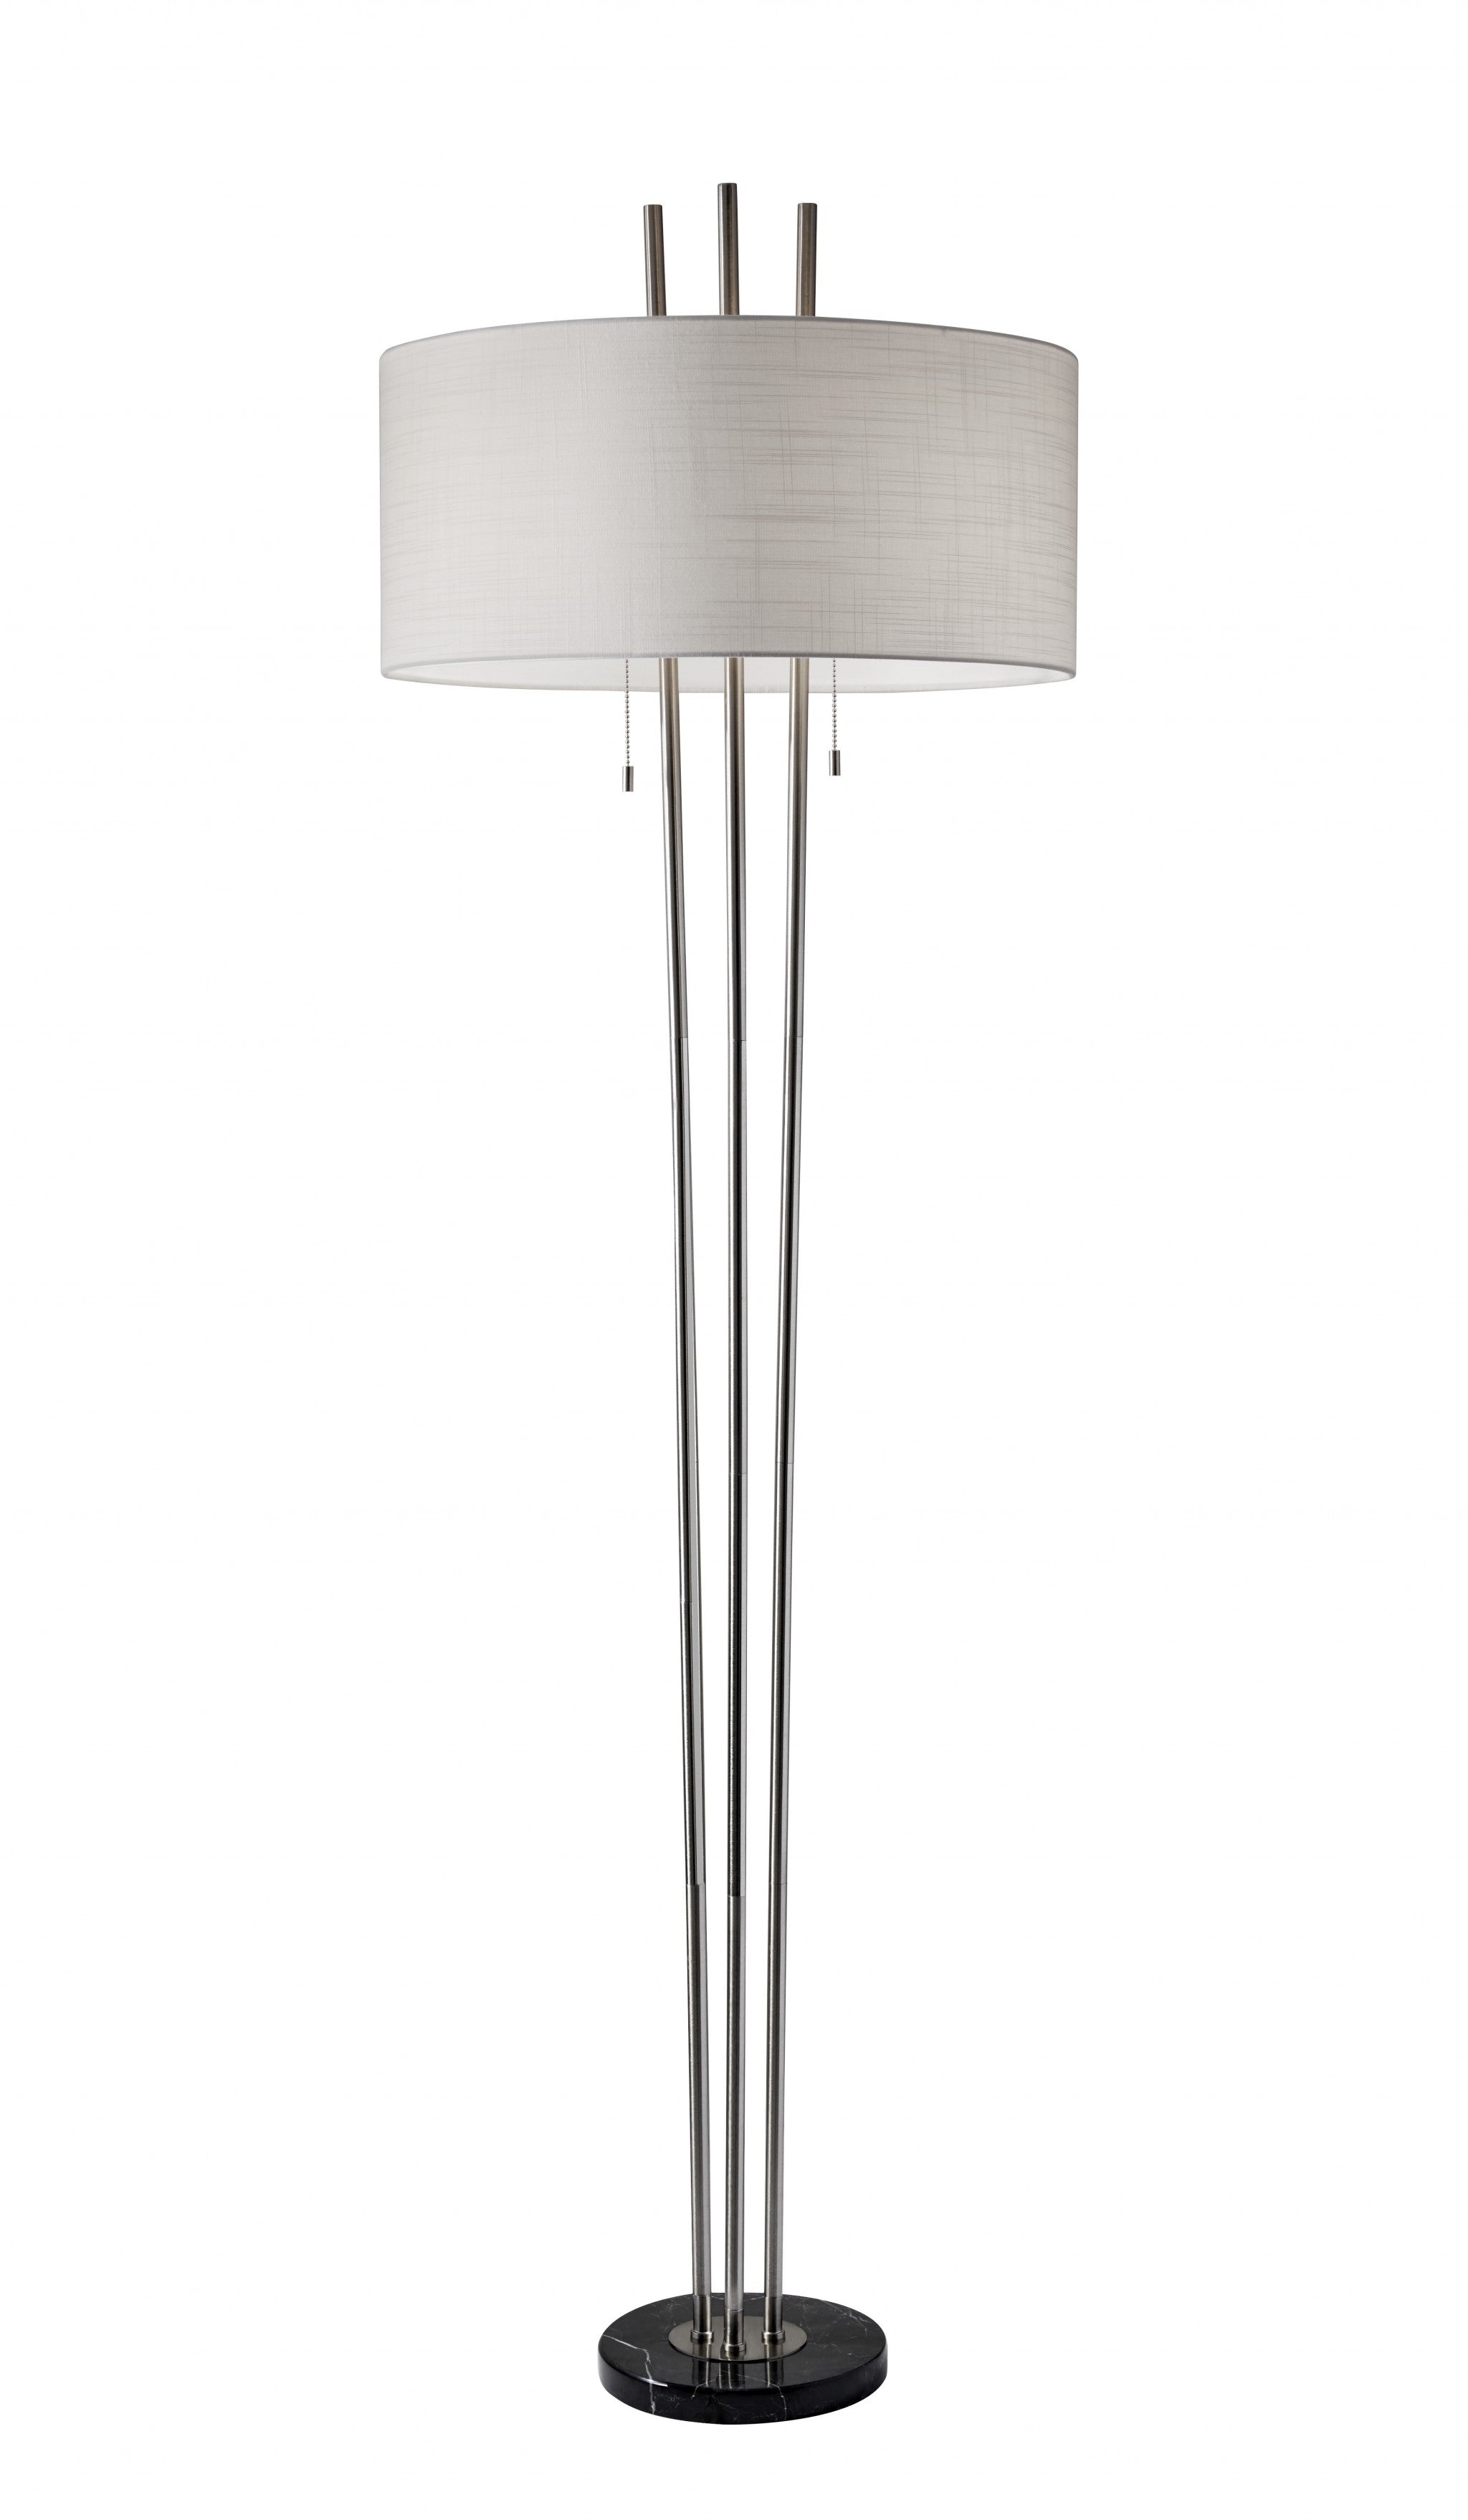 71" Two Light Three Pole Floor Lamp With White Fabric Drum Shade